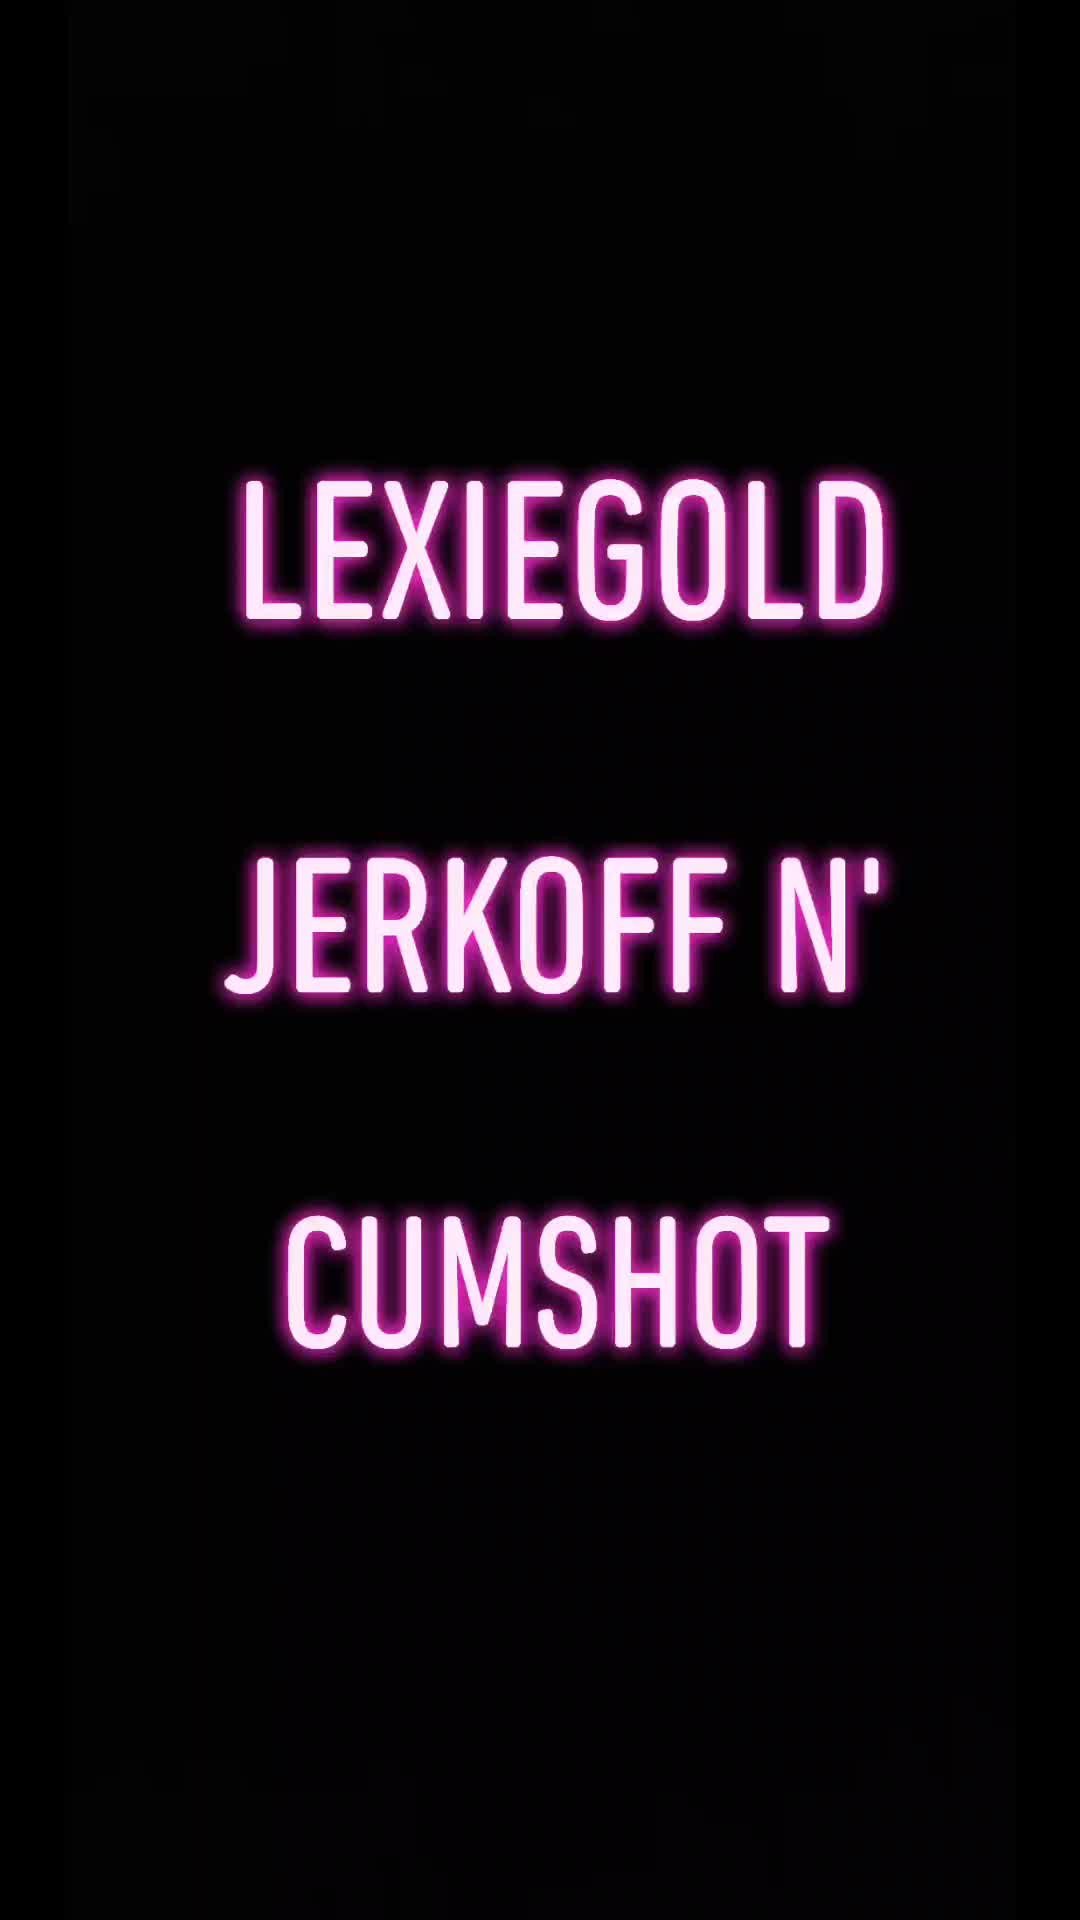 Video post by LexieGold